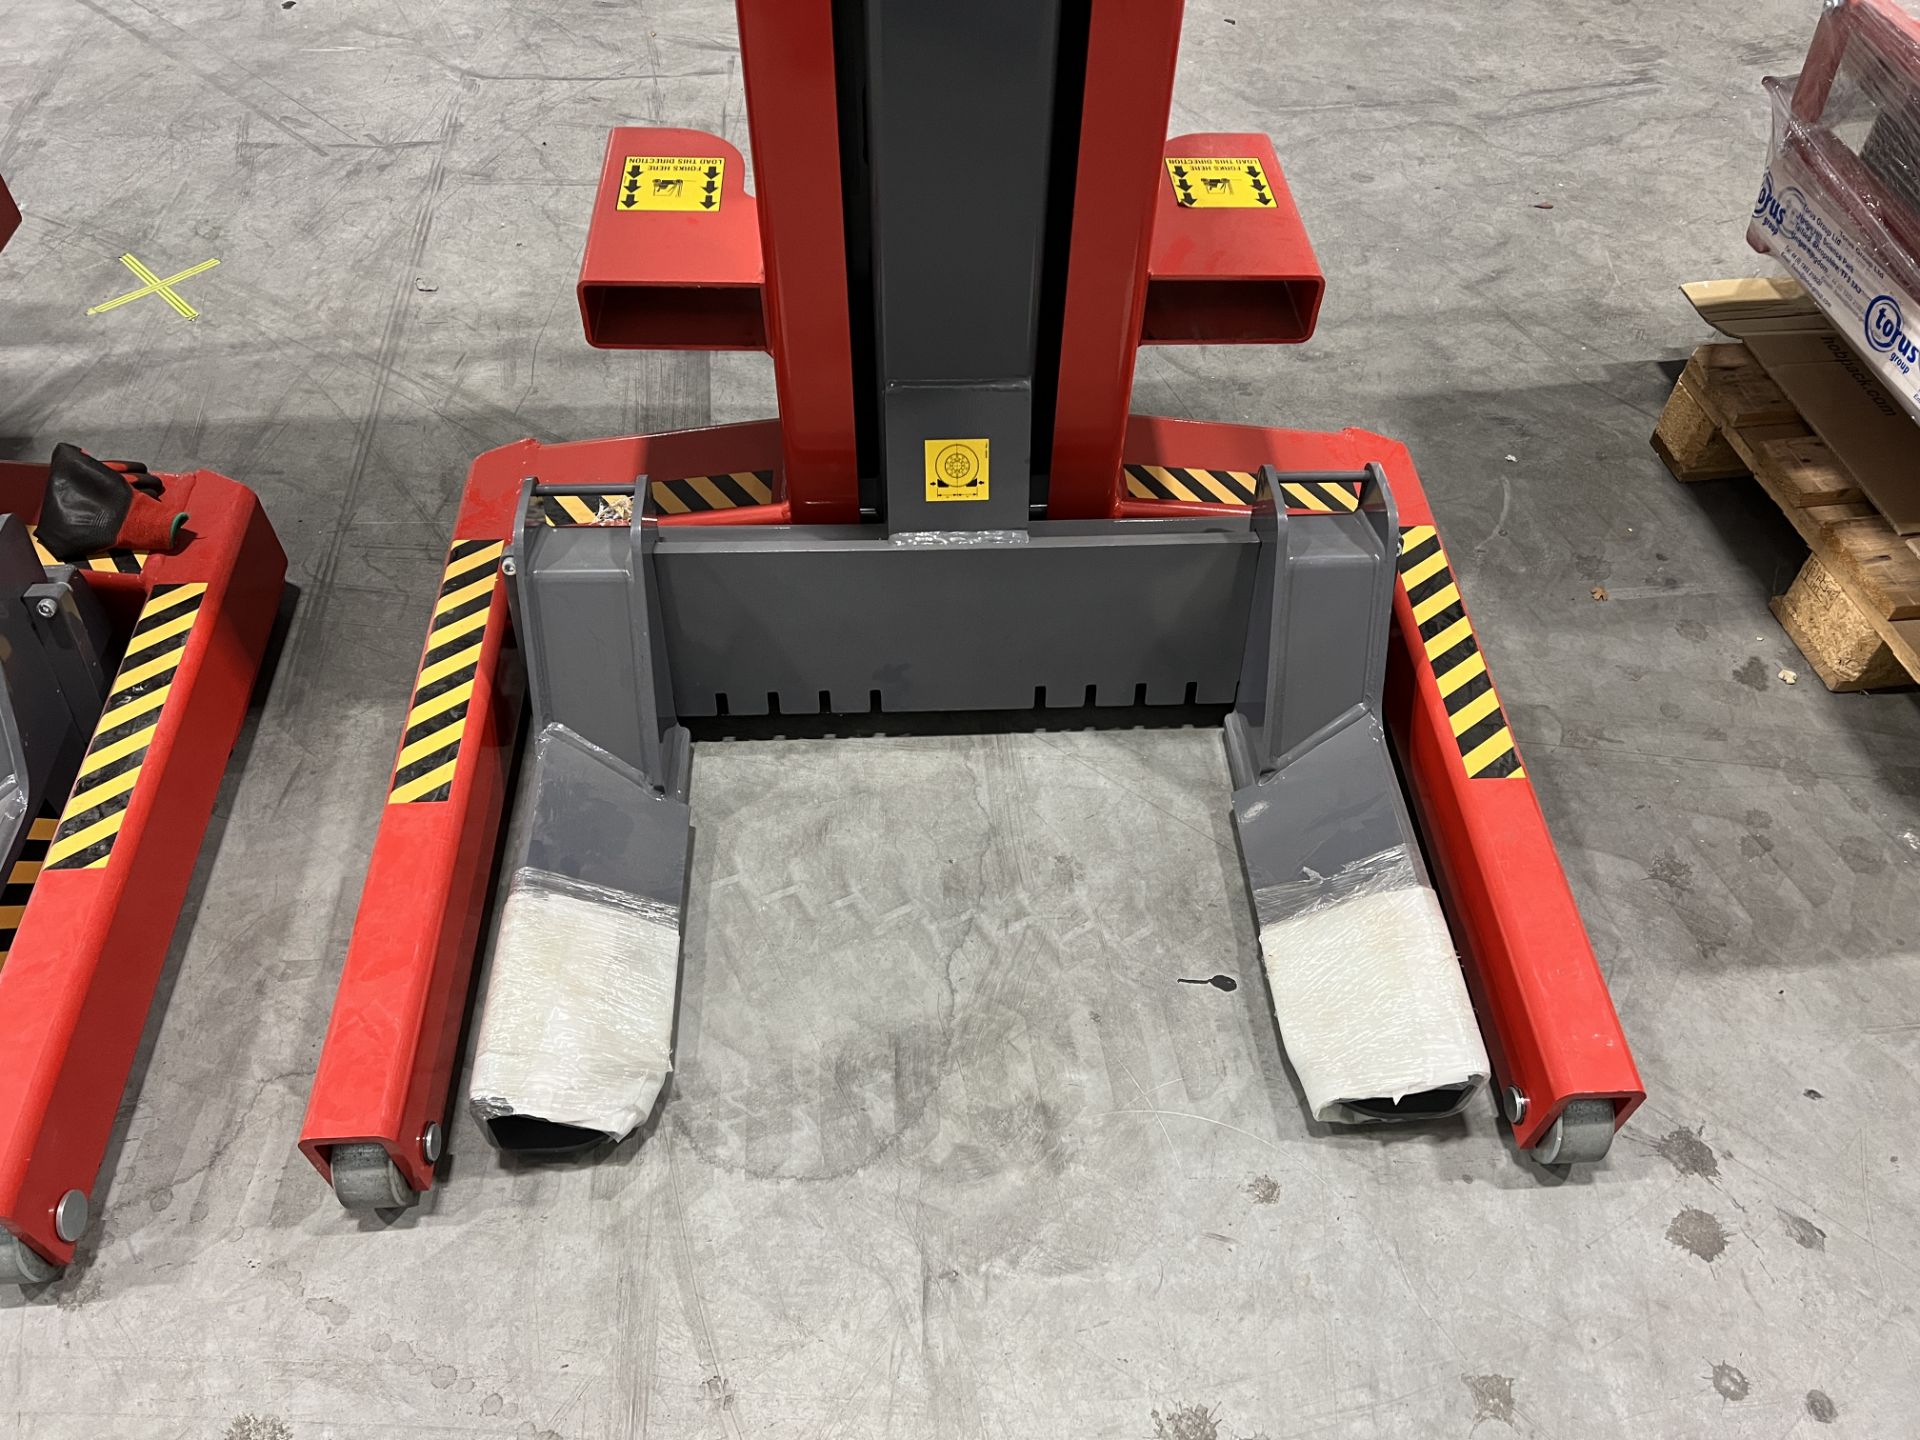 Qty 4, Totalkare T8DC cable free mobile column vehicle lifts, S/No. 012240/4, 012240/3, 012240/2, - Image 9 of 17